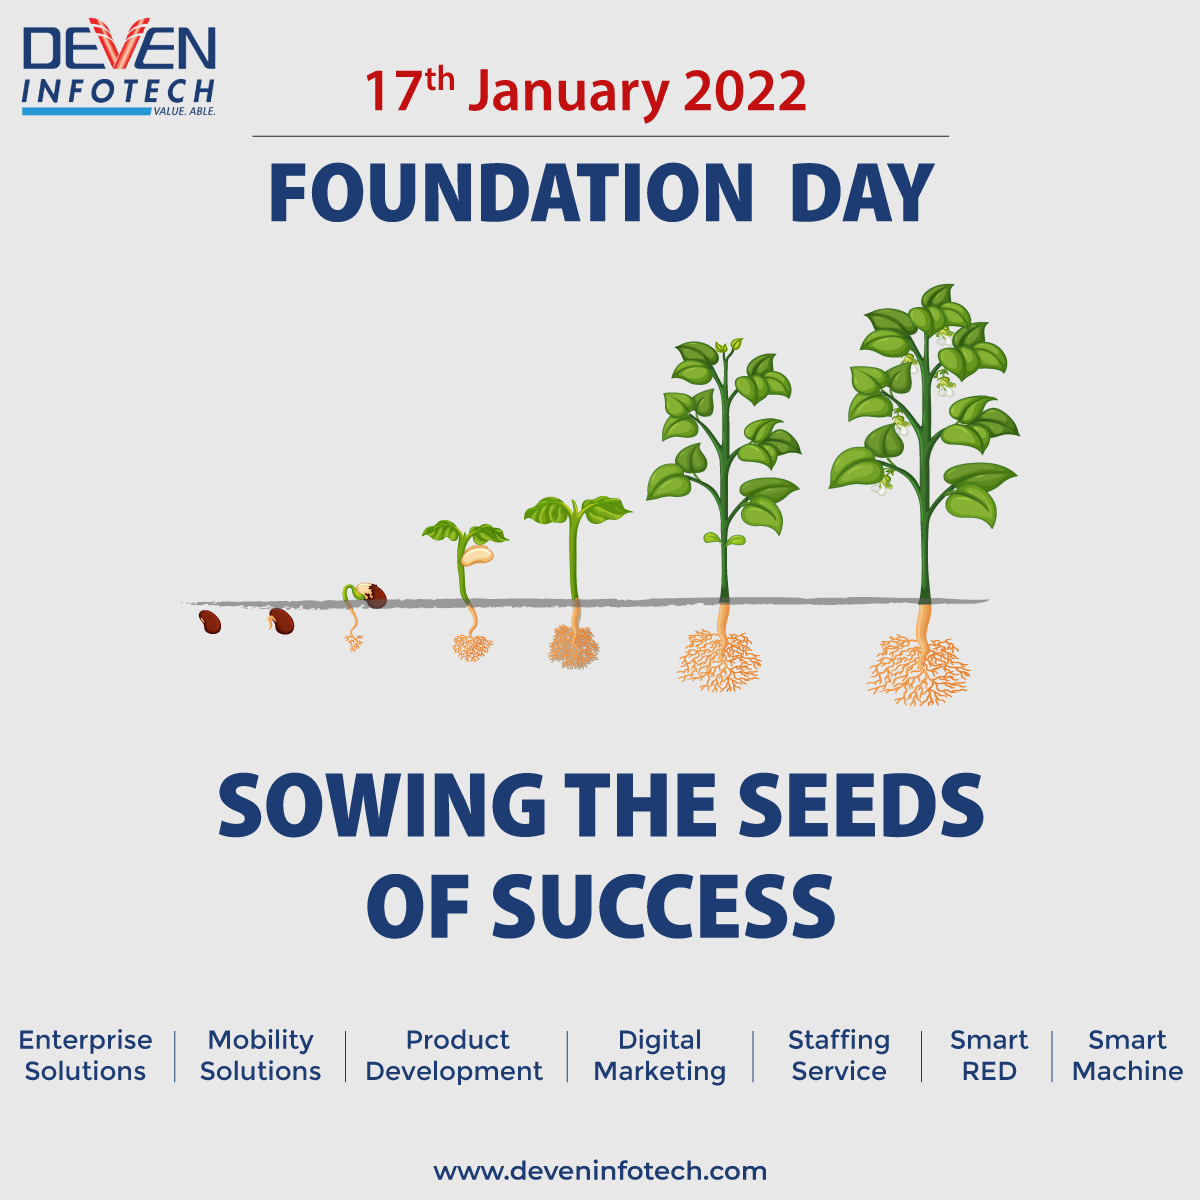 9 years ago, Deven InfoTech was formed to utilize emerging technologies to create innovative, user-friendly, and value-adding industry solutions. 

Thank you to our clients, partners, and all our well-wishers for your support!
...
#deveninfotech #foundationday #pune #itstartup